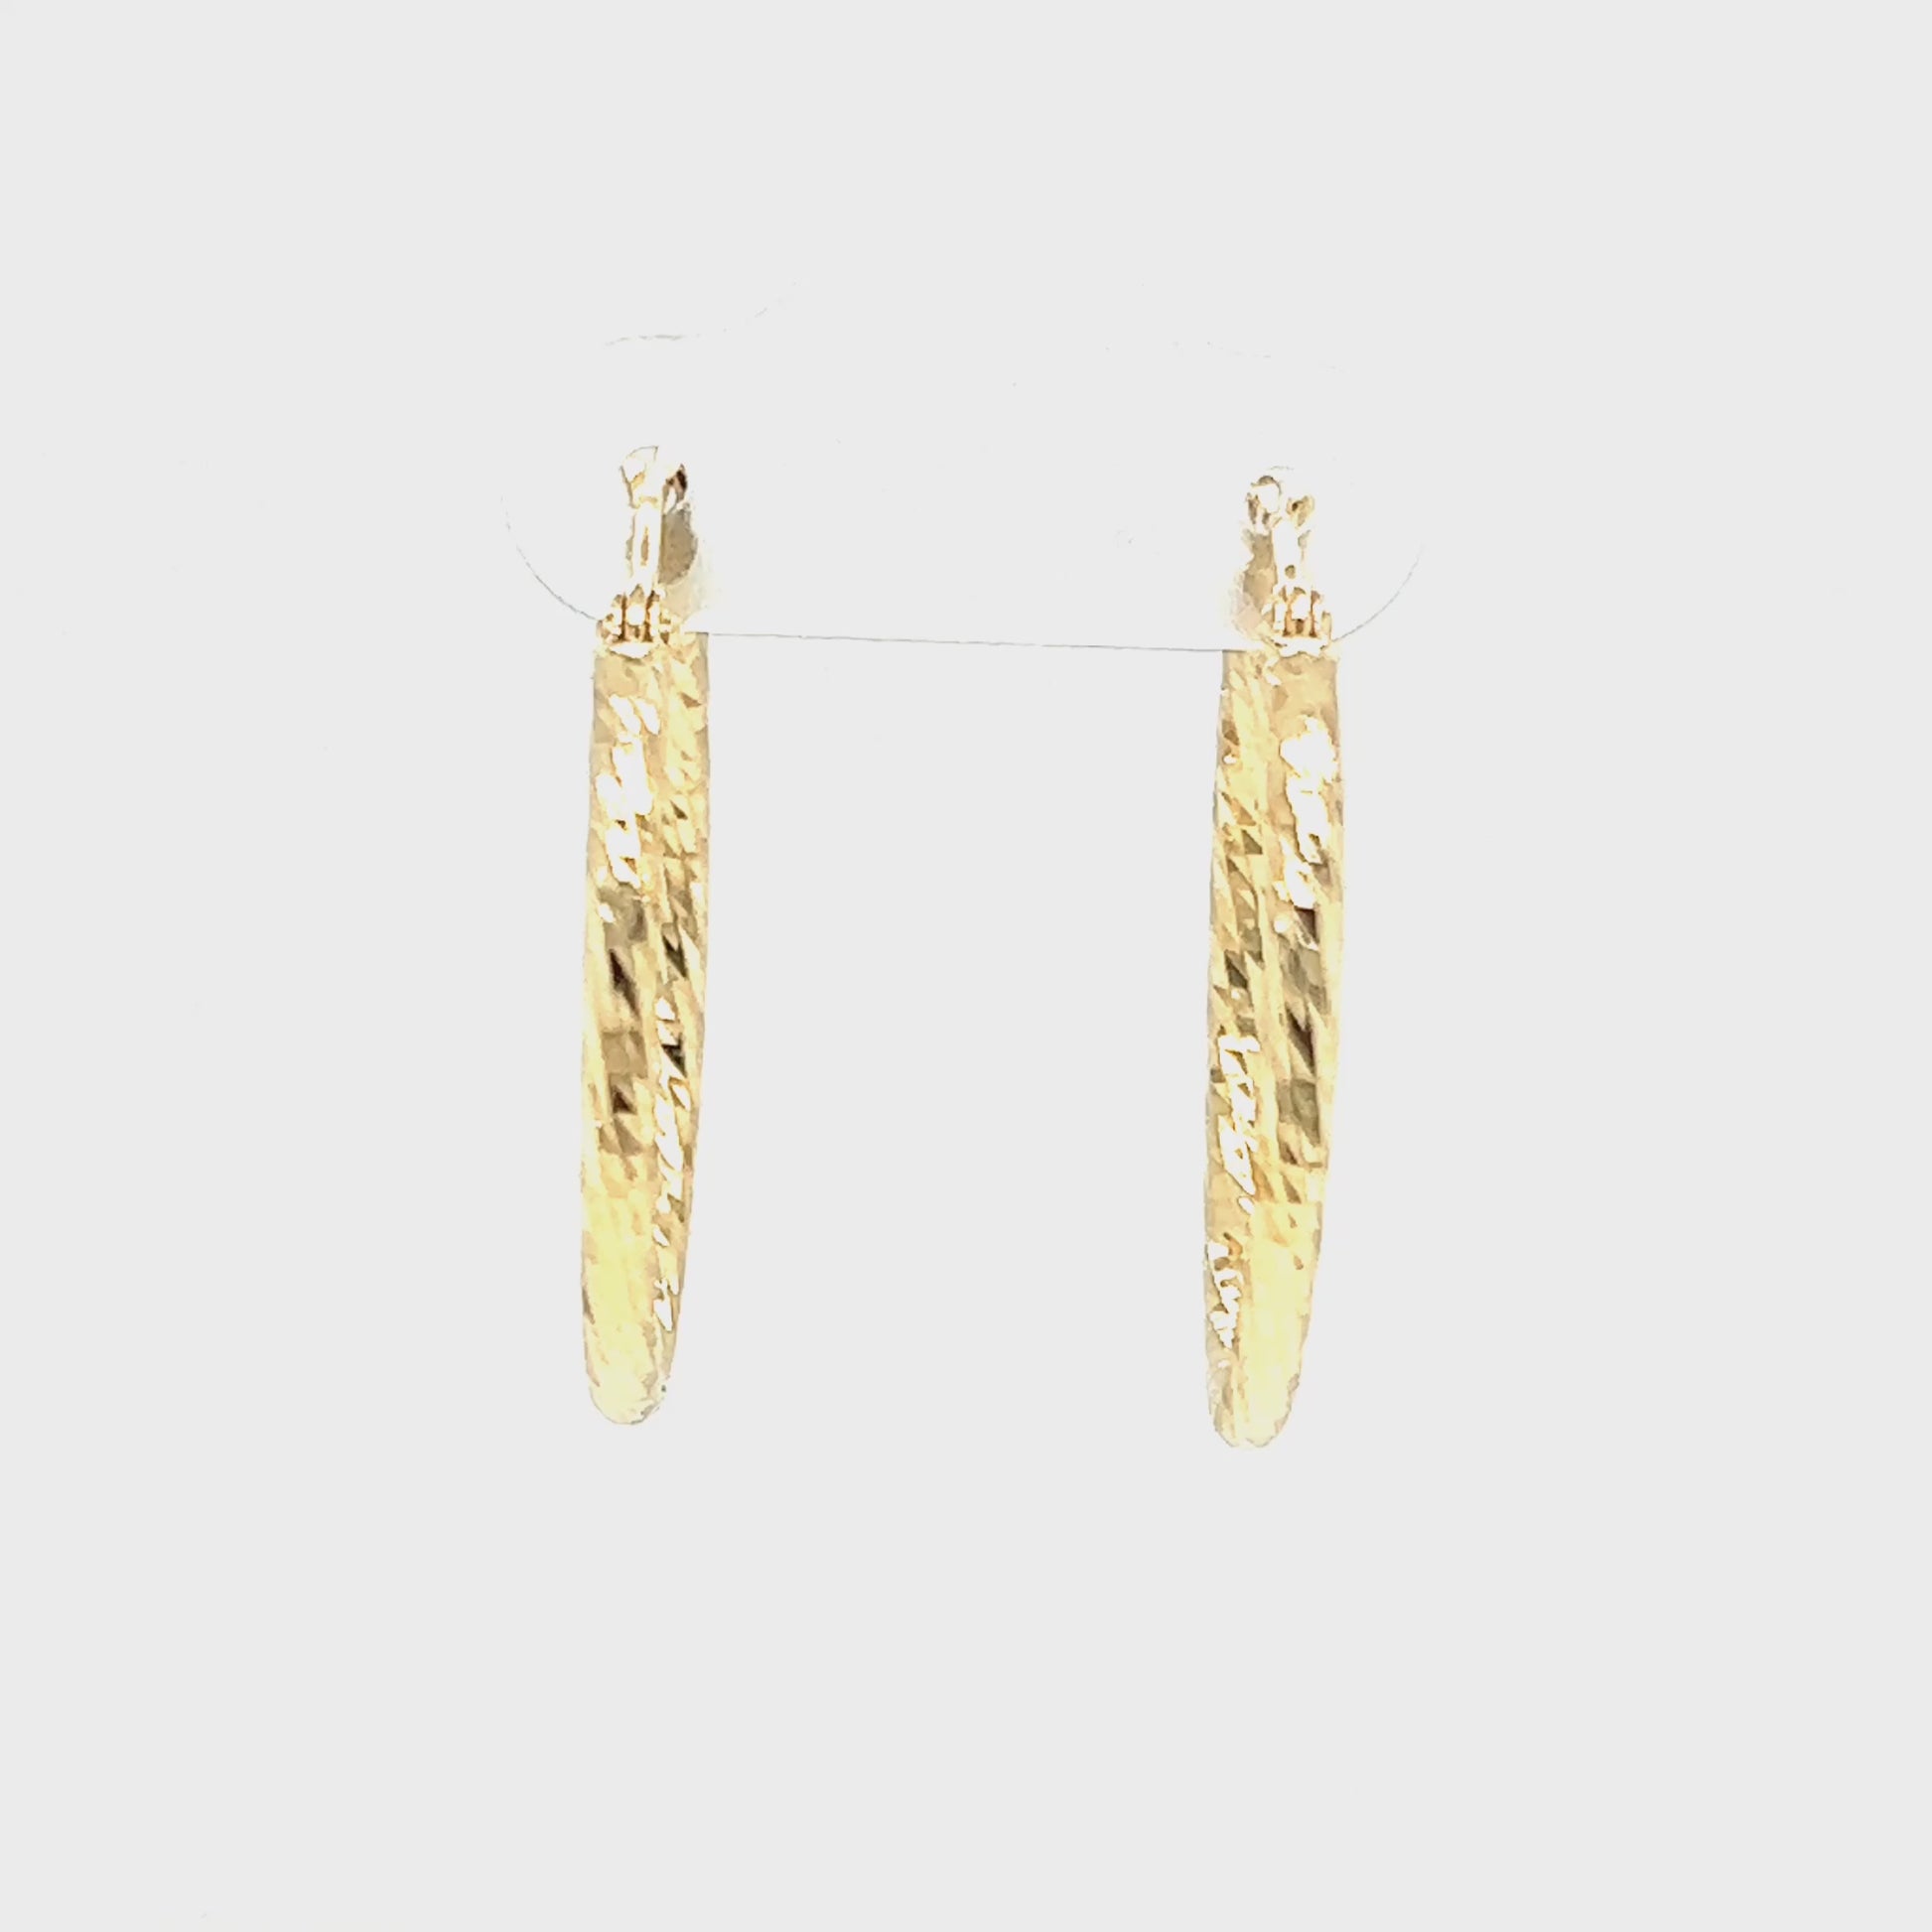 Round Hoop 25.5mm Earrings with Diamond-cut Finish in 14K Yellow Gold Video